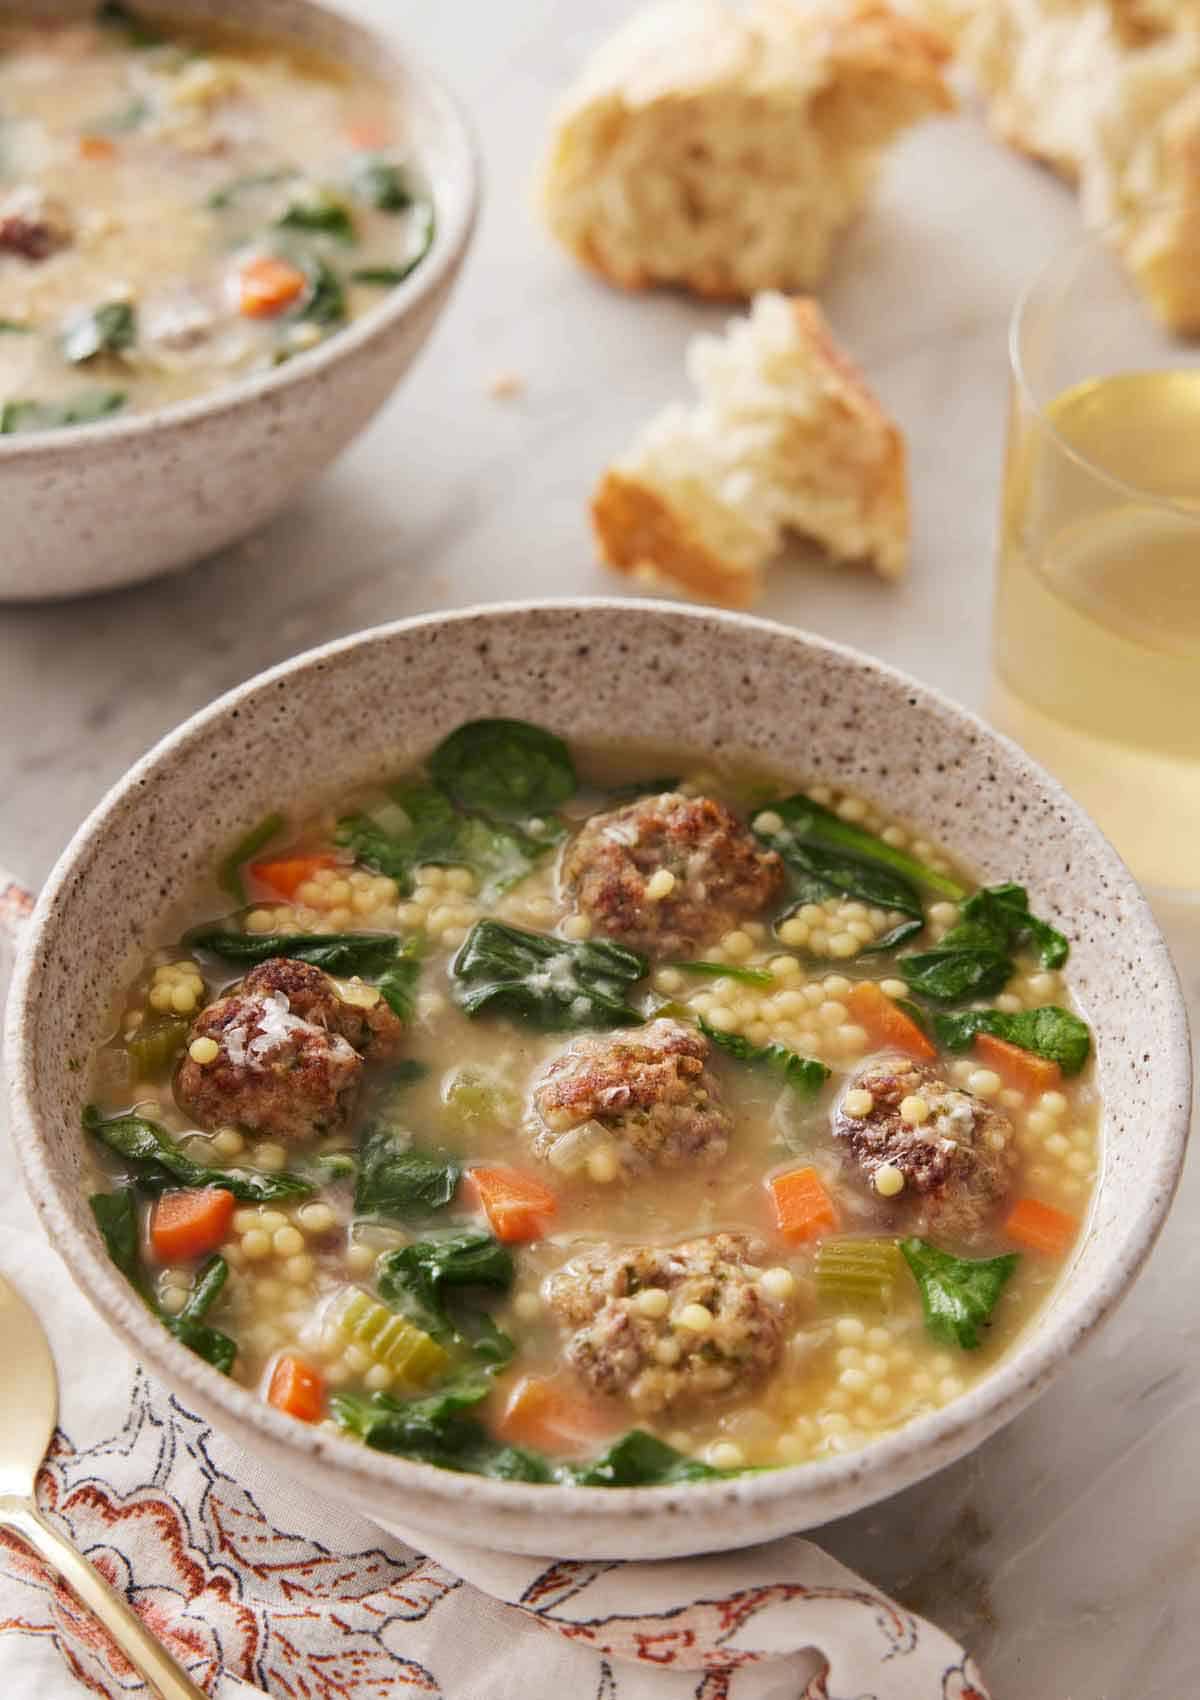 A bowl of Italian wedding soup with some torn bread and a glass of wine in the background.